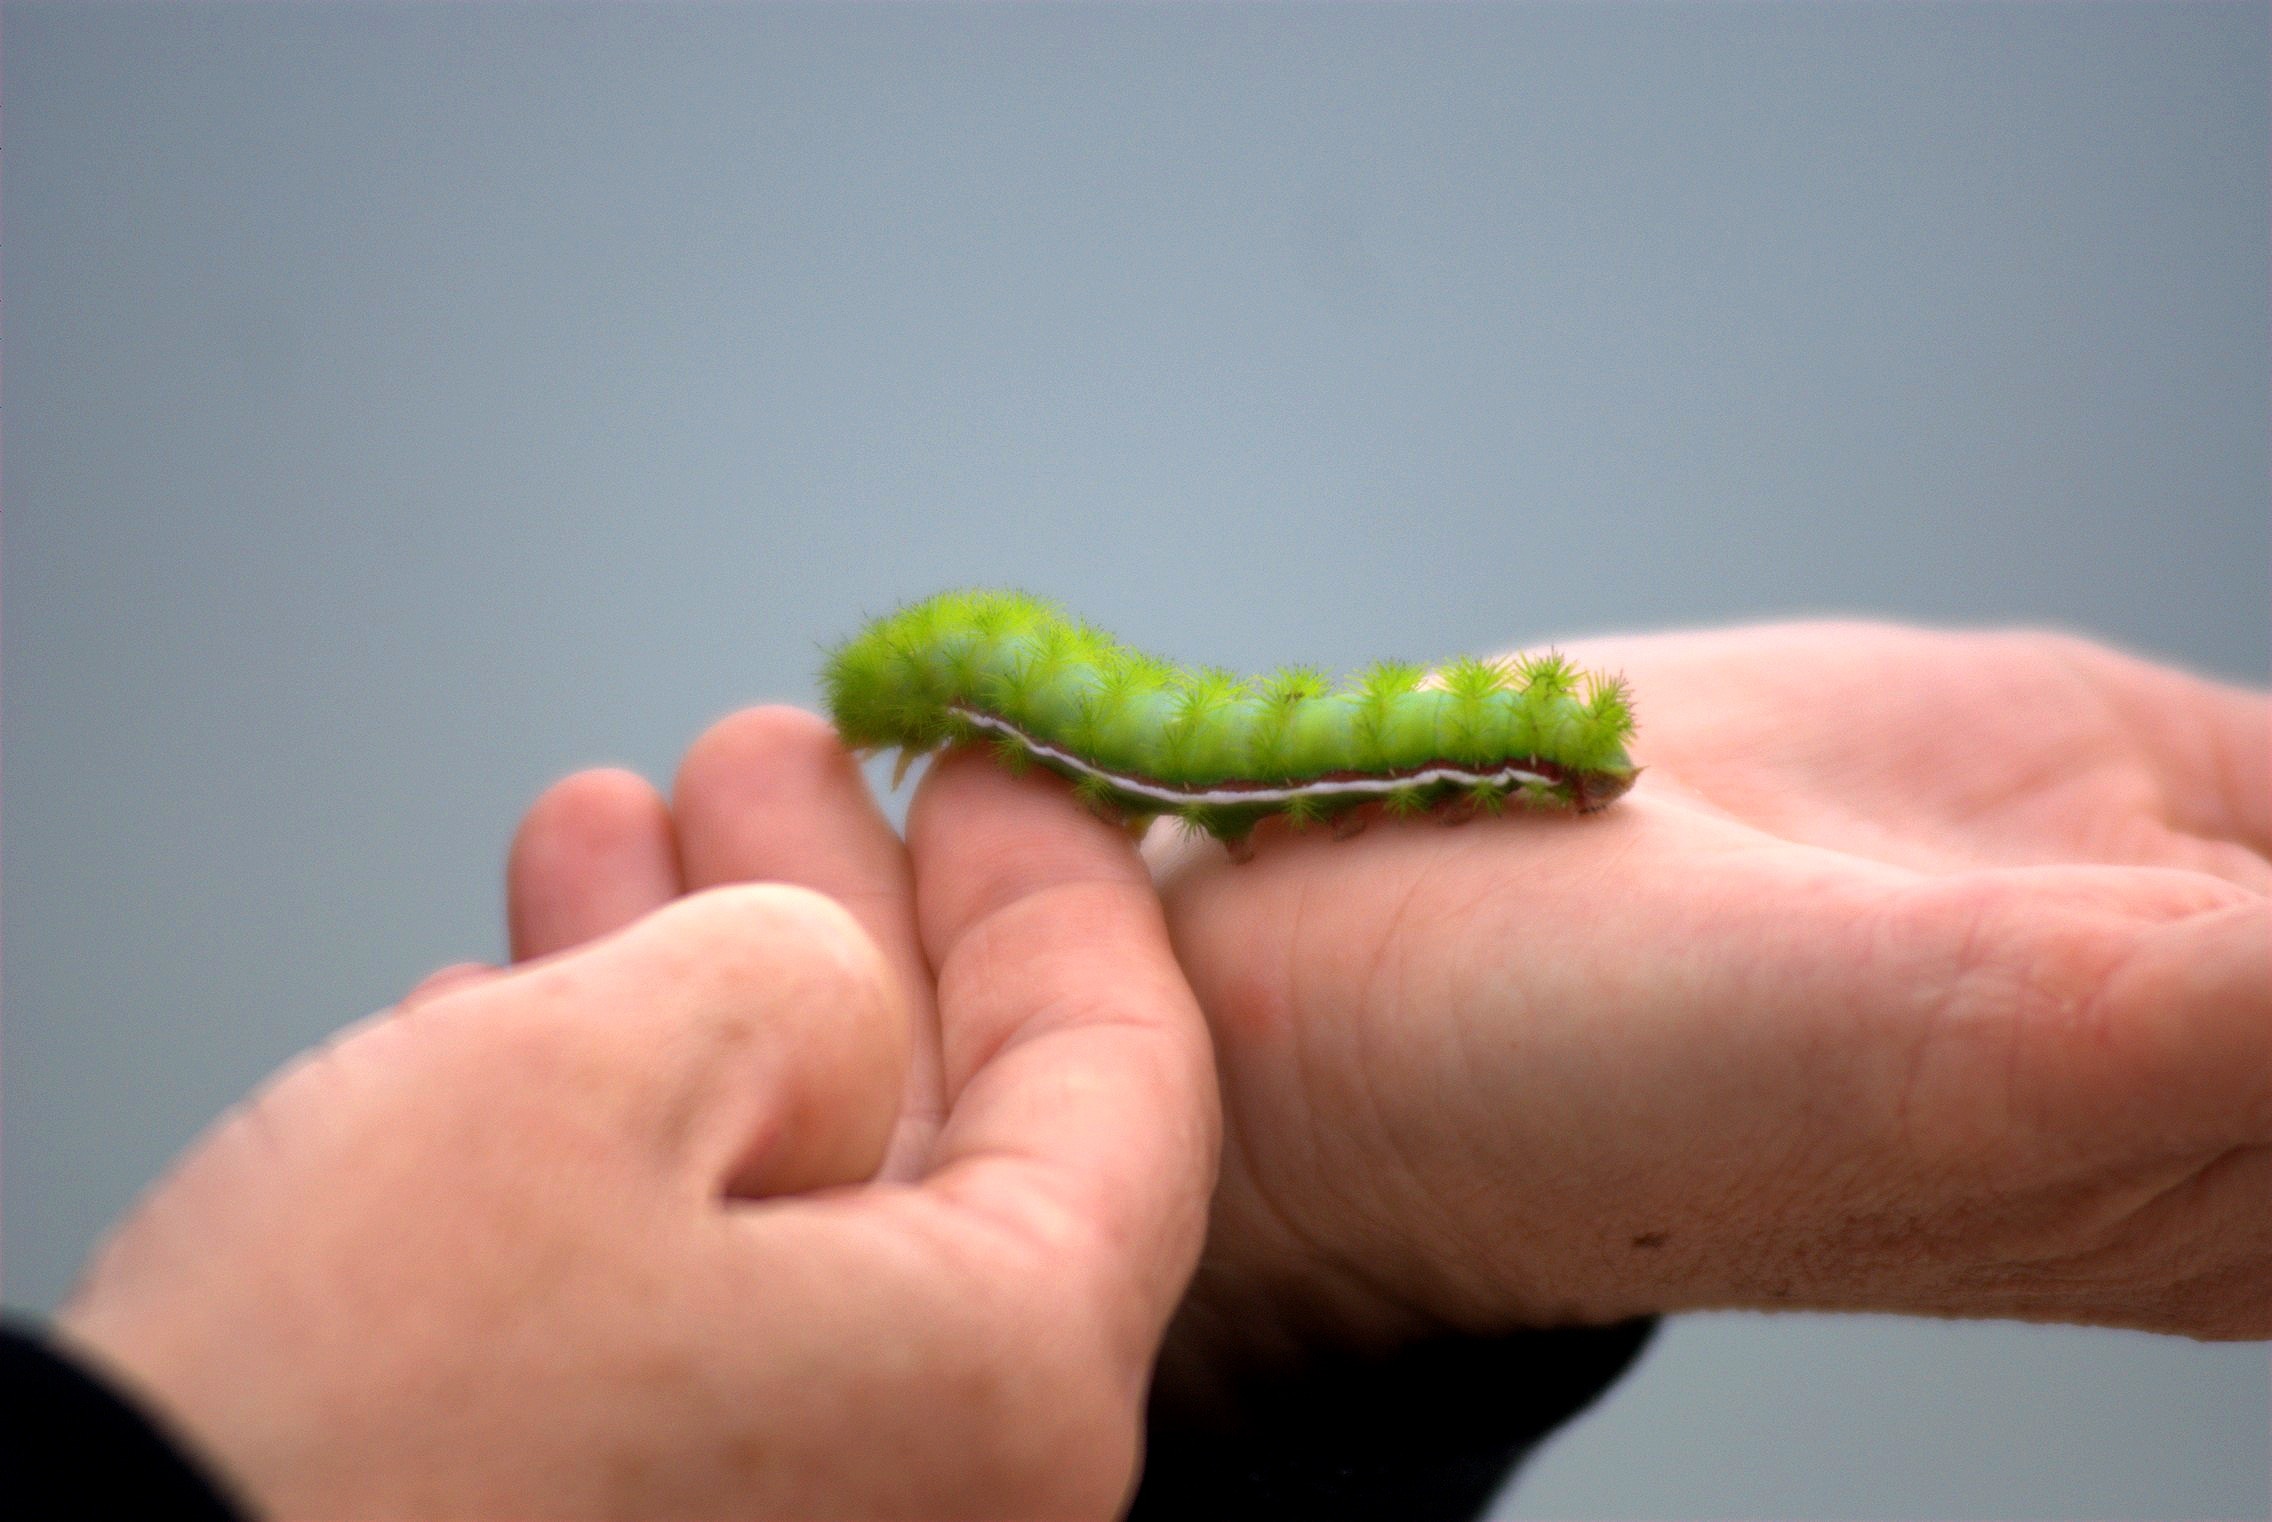 green caterpillar on person's hand